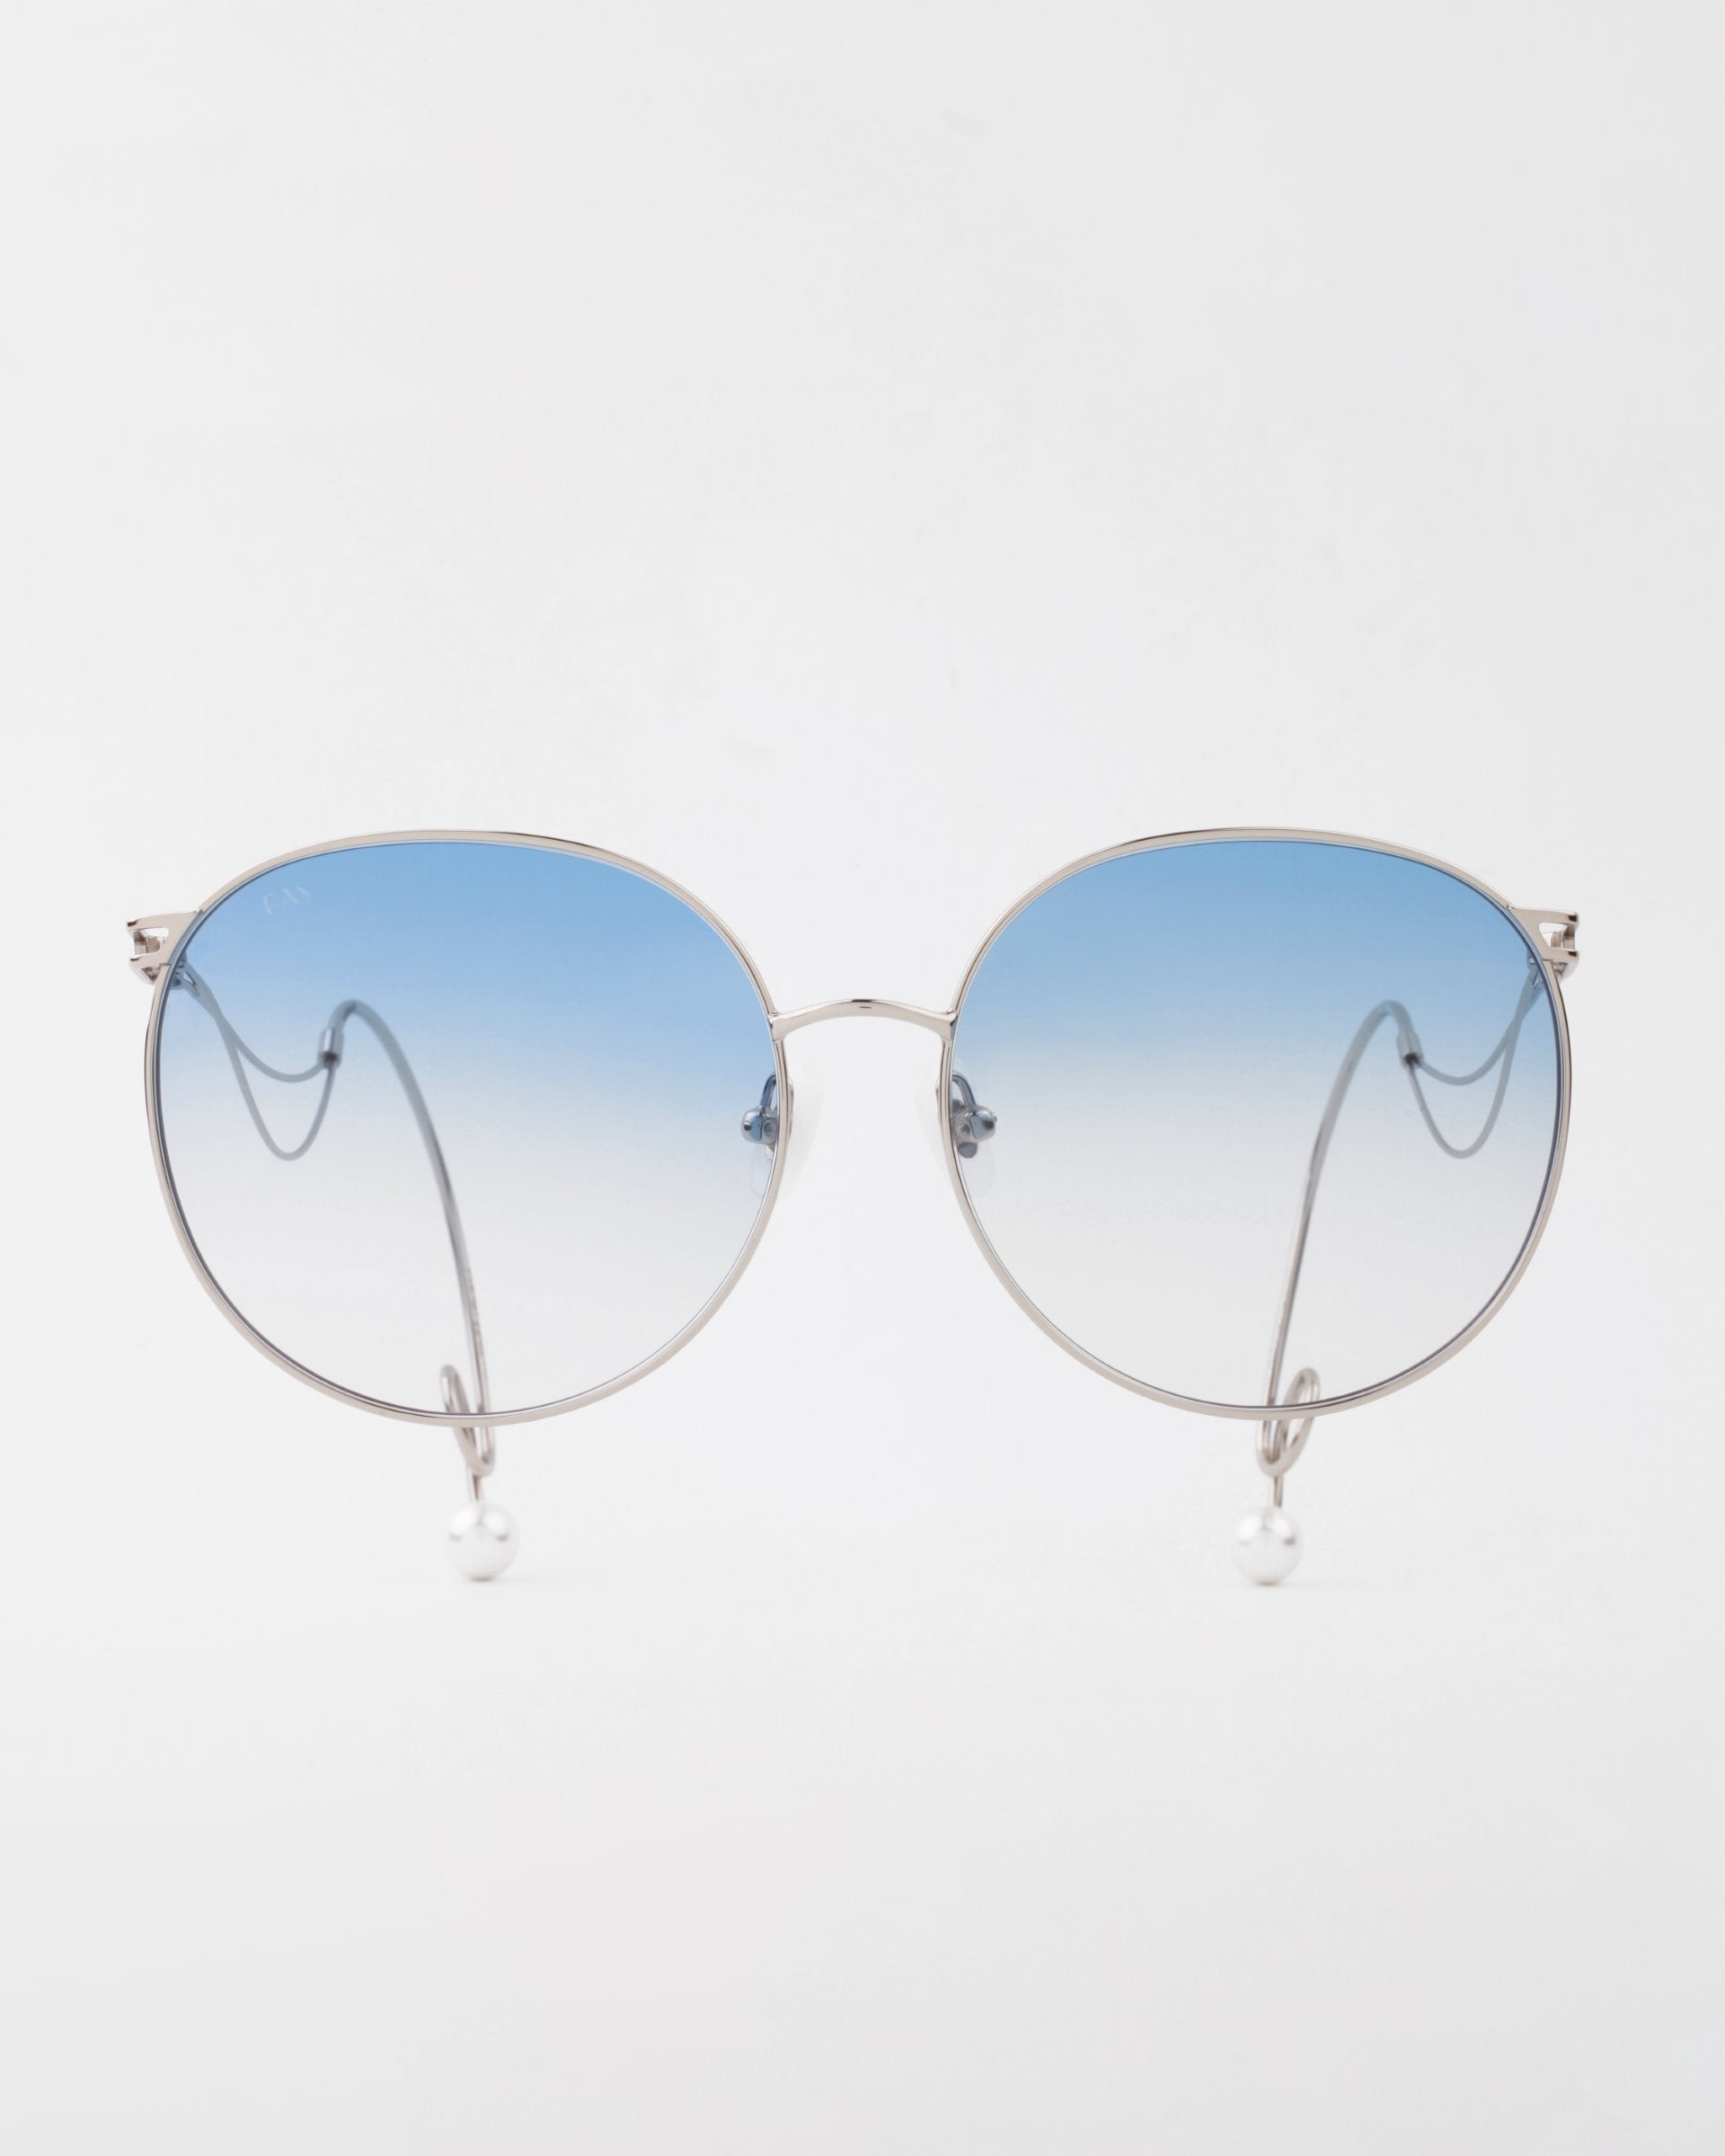 A pair of round For Art&#39;s Sake® Birthday Cake sunglasses with a thin, handmade gold-plated frame and blue gradient, lightweight shatter-resistant lenses. The temples have pearl accents at the ends, and the glasses are set against a plain white background.